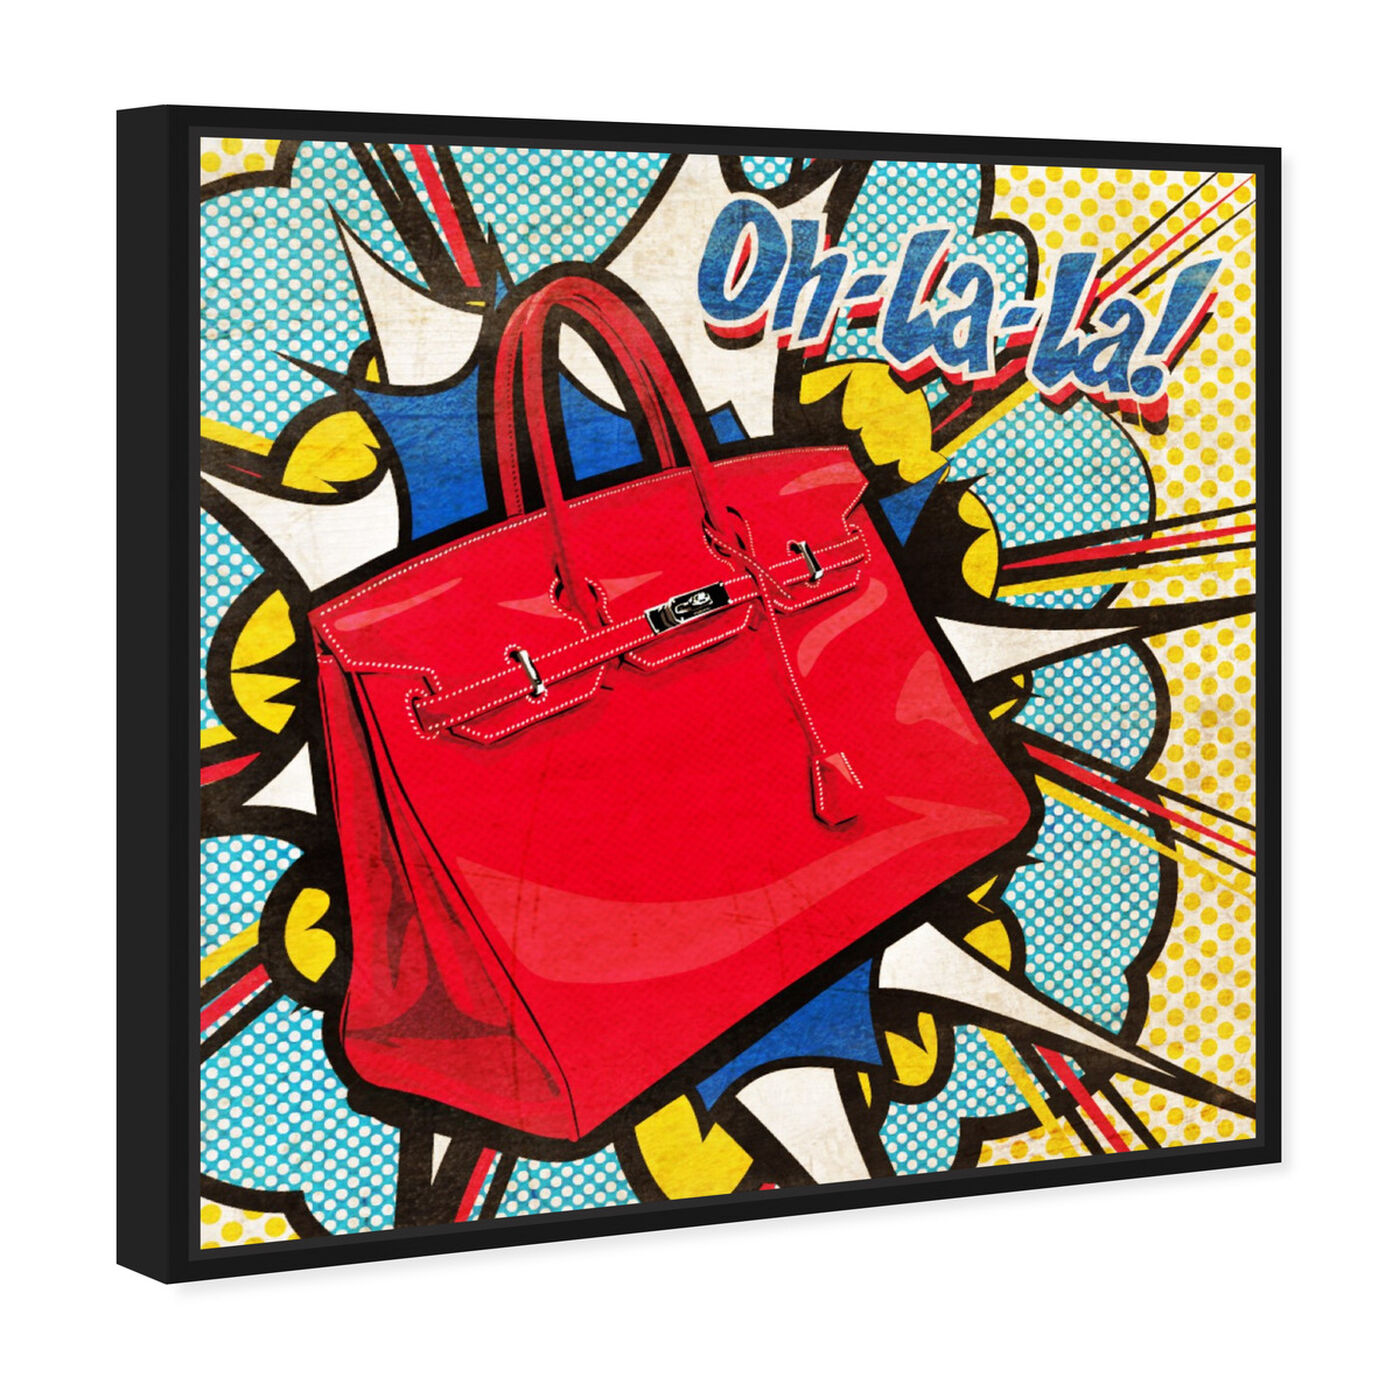 Angled view of Oh La La Vintage featuring advertising and comics art.